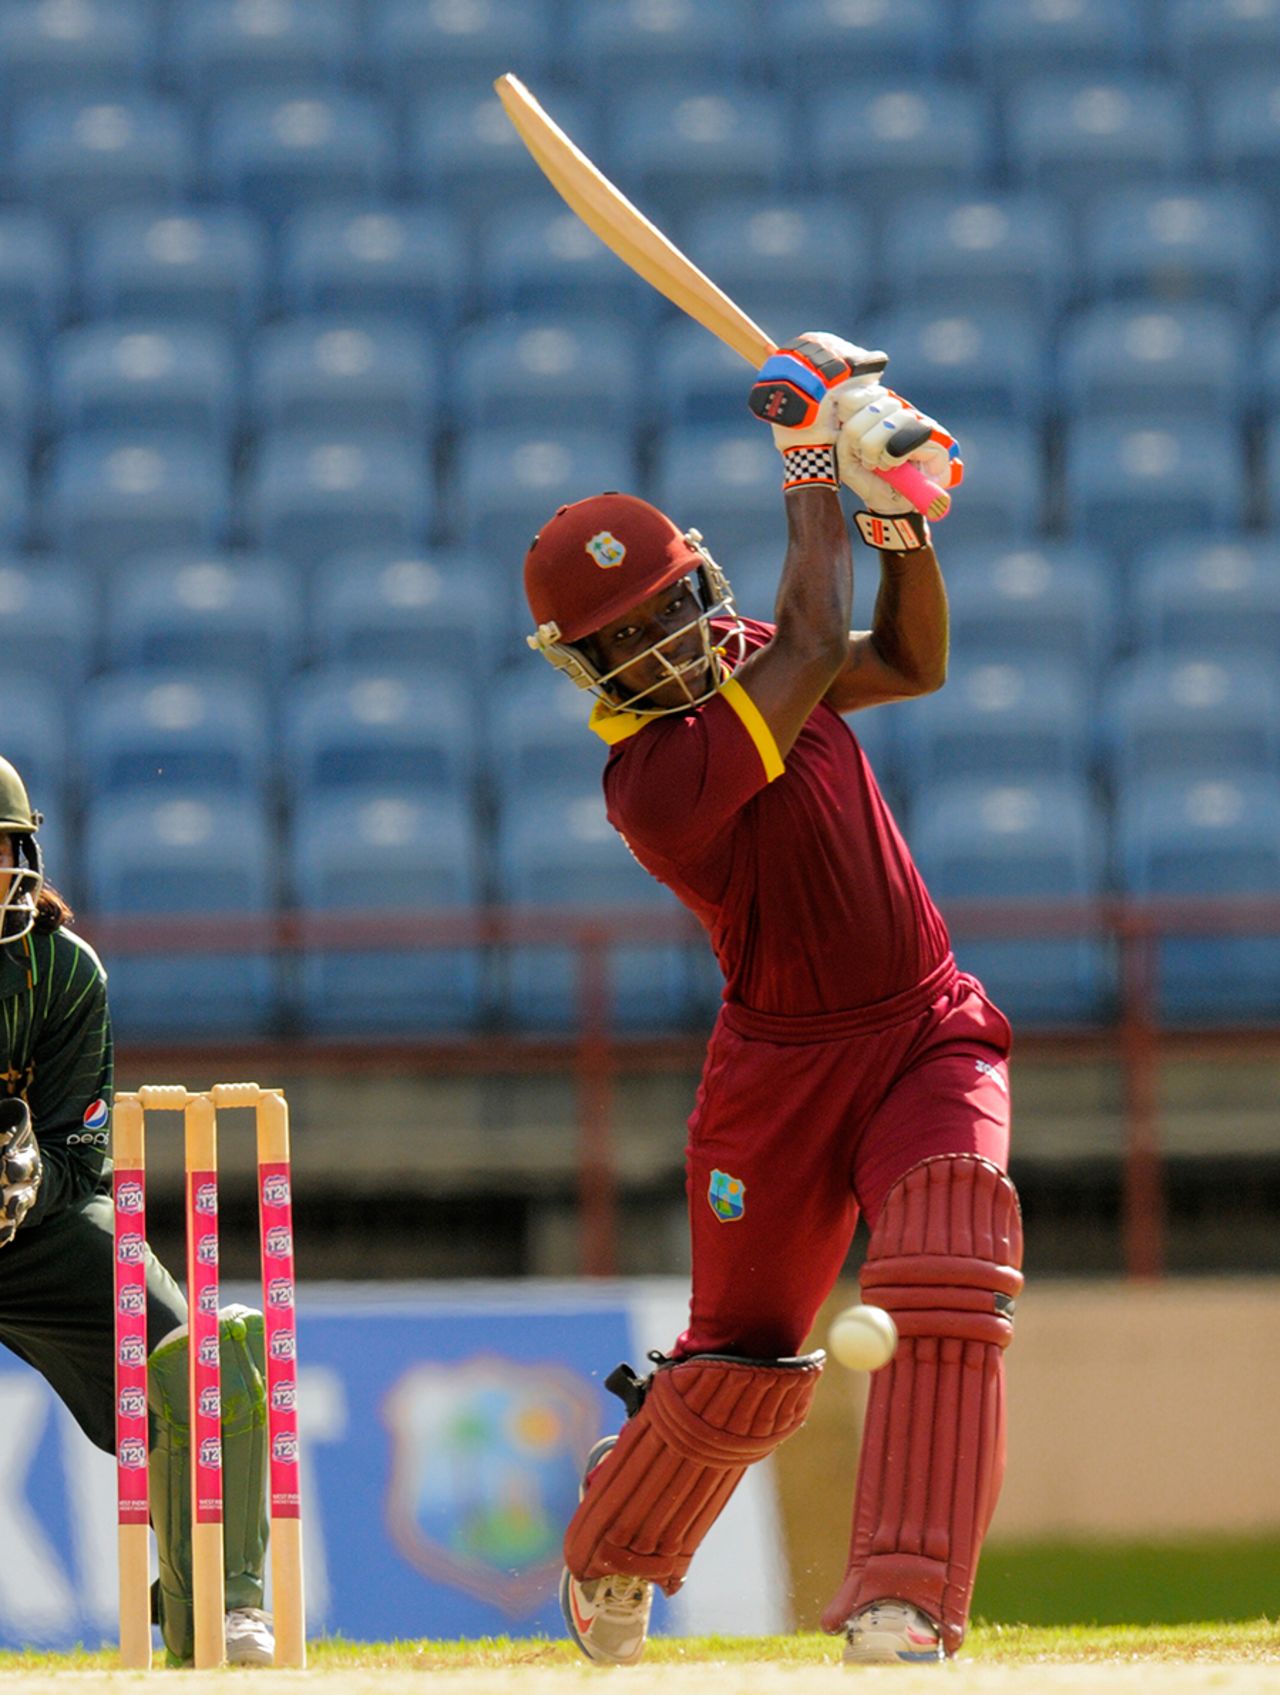 Deandra Dottin chipped in with two wickets and a brisk 38 not out, West Indies v Pakistan, 1st women's T20, Grenada, October 29, 2015